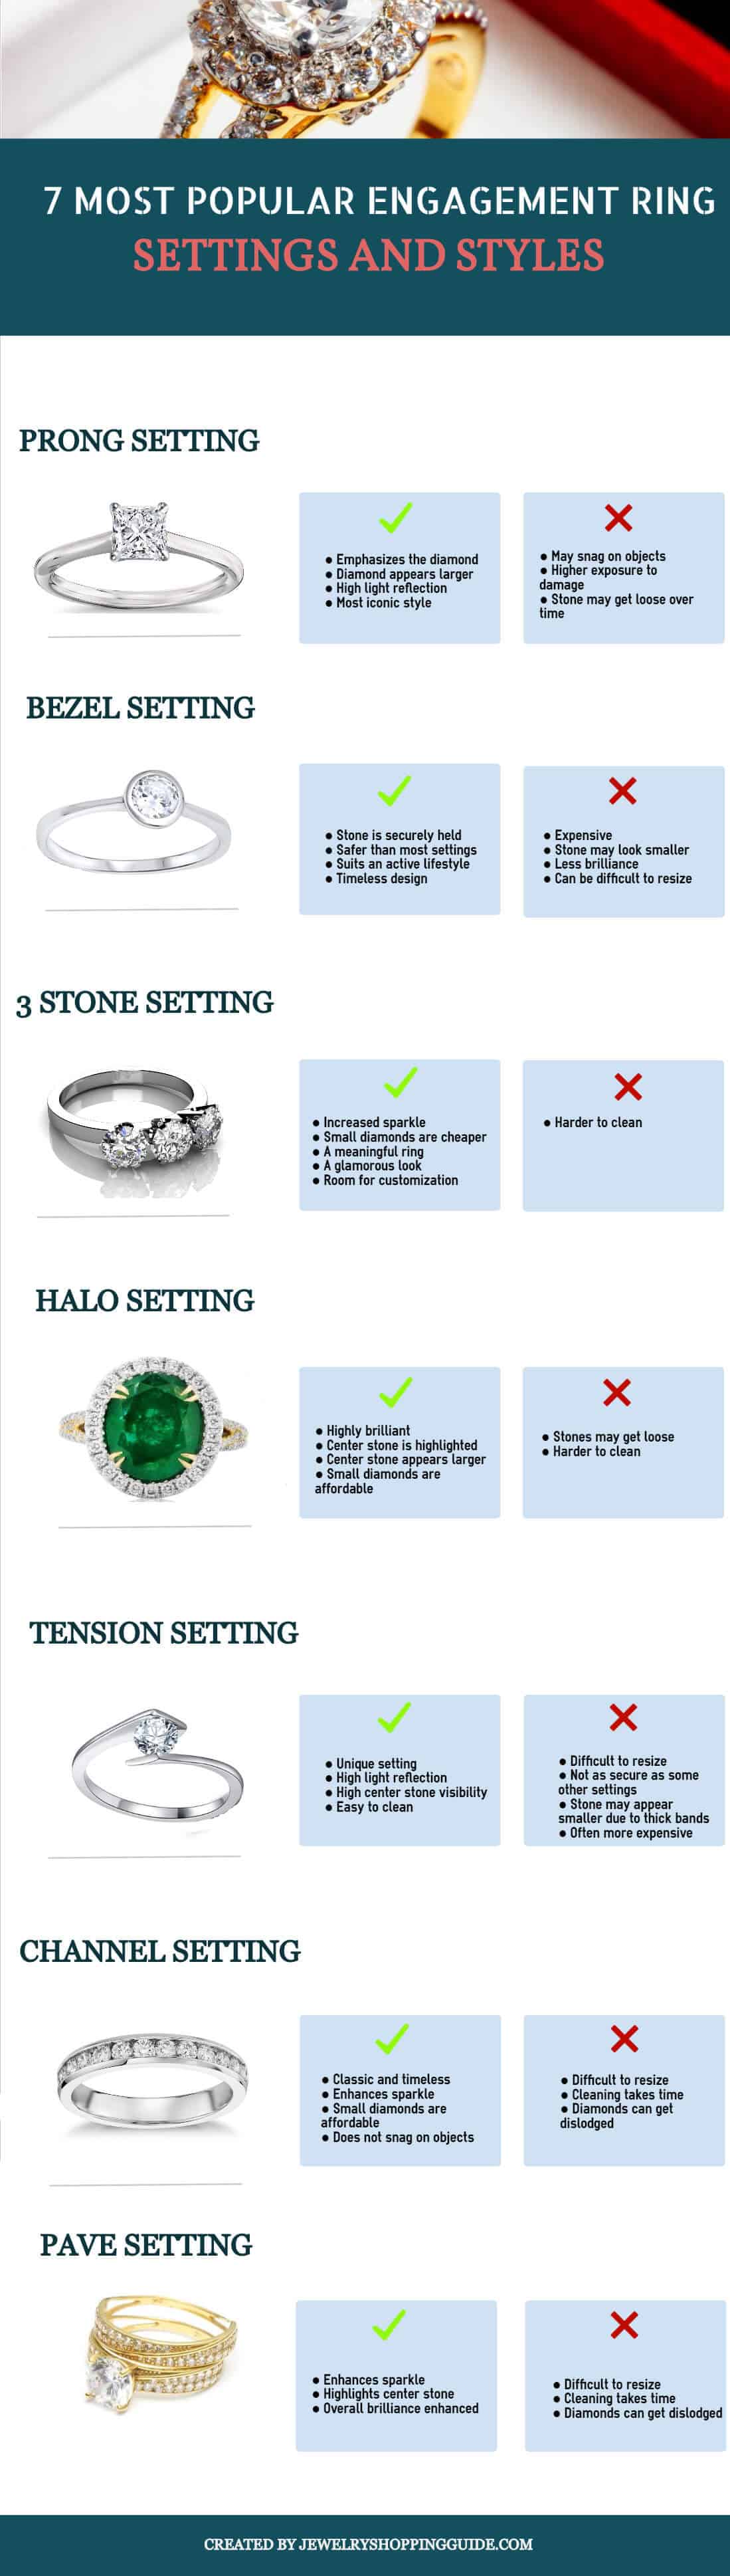 ENGAGEMENT-RING-SETTINGS-AND-STYLES-infographic | Jewelry Guide